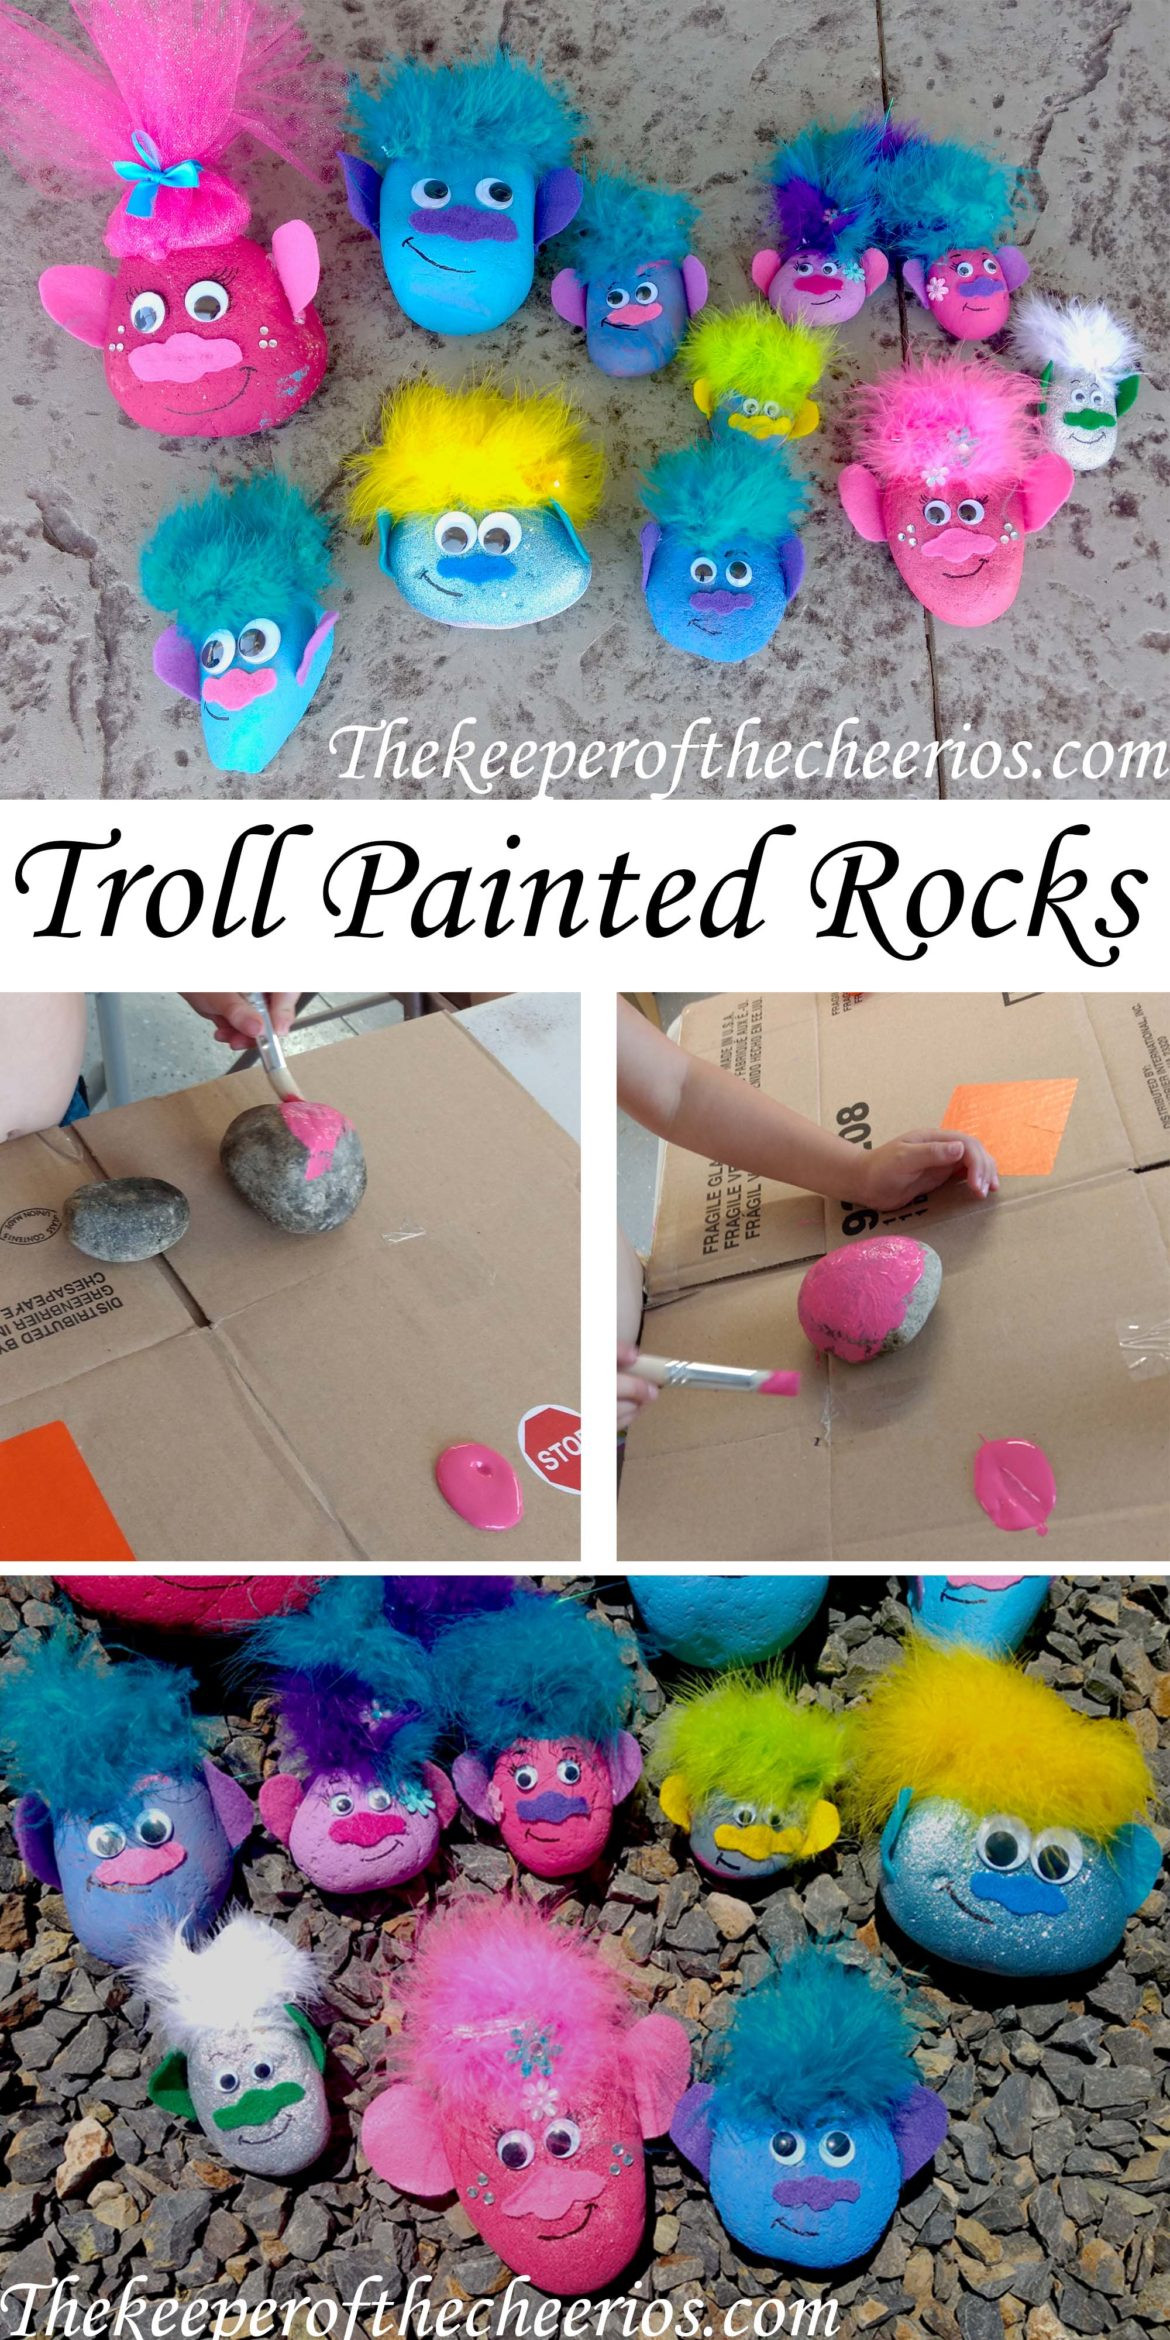 Preschool Craft Projects
 TROLL PAINTED ROCKS The Keeper of the Cheerios